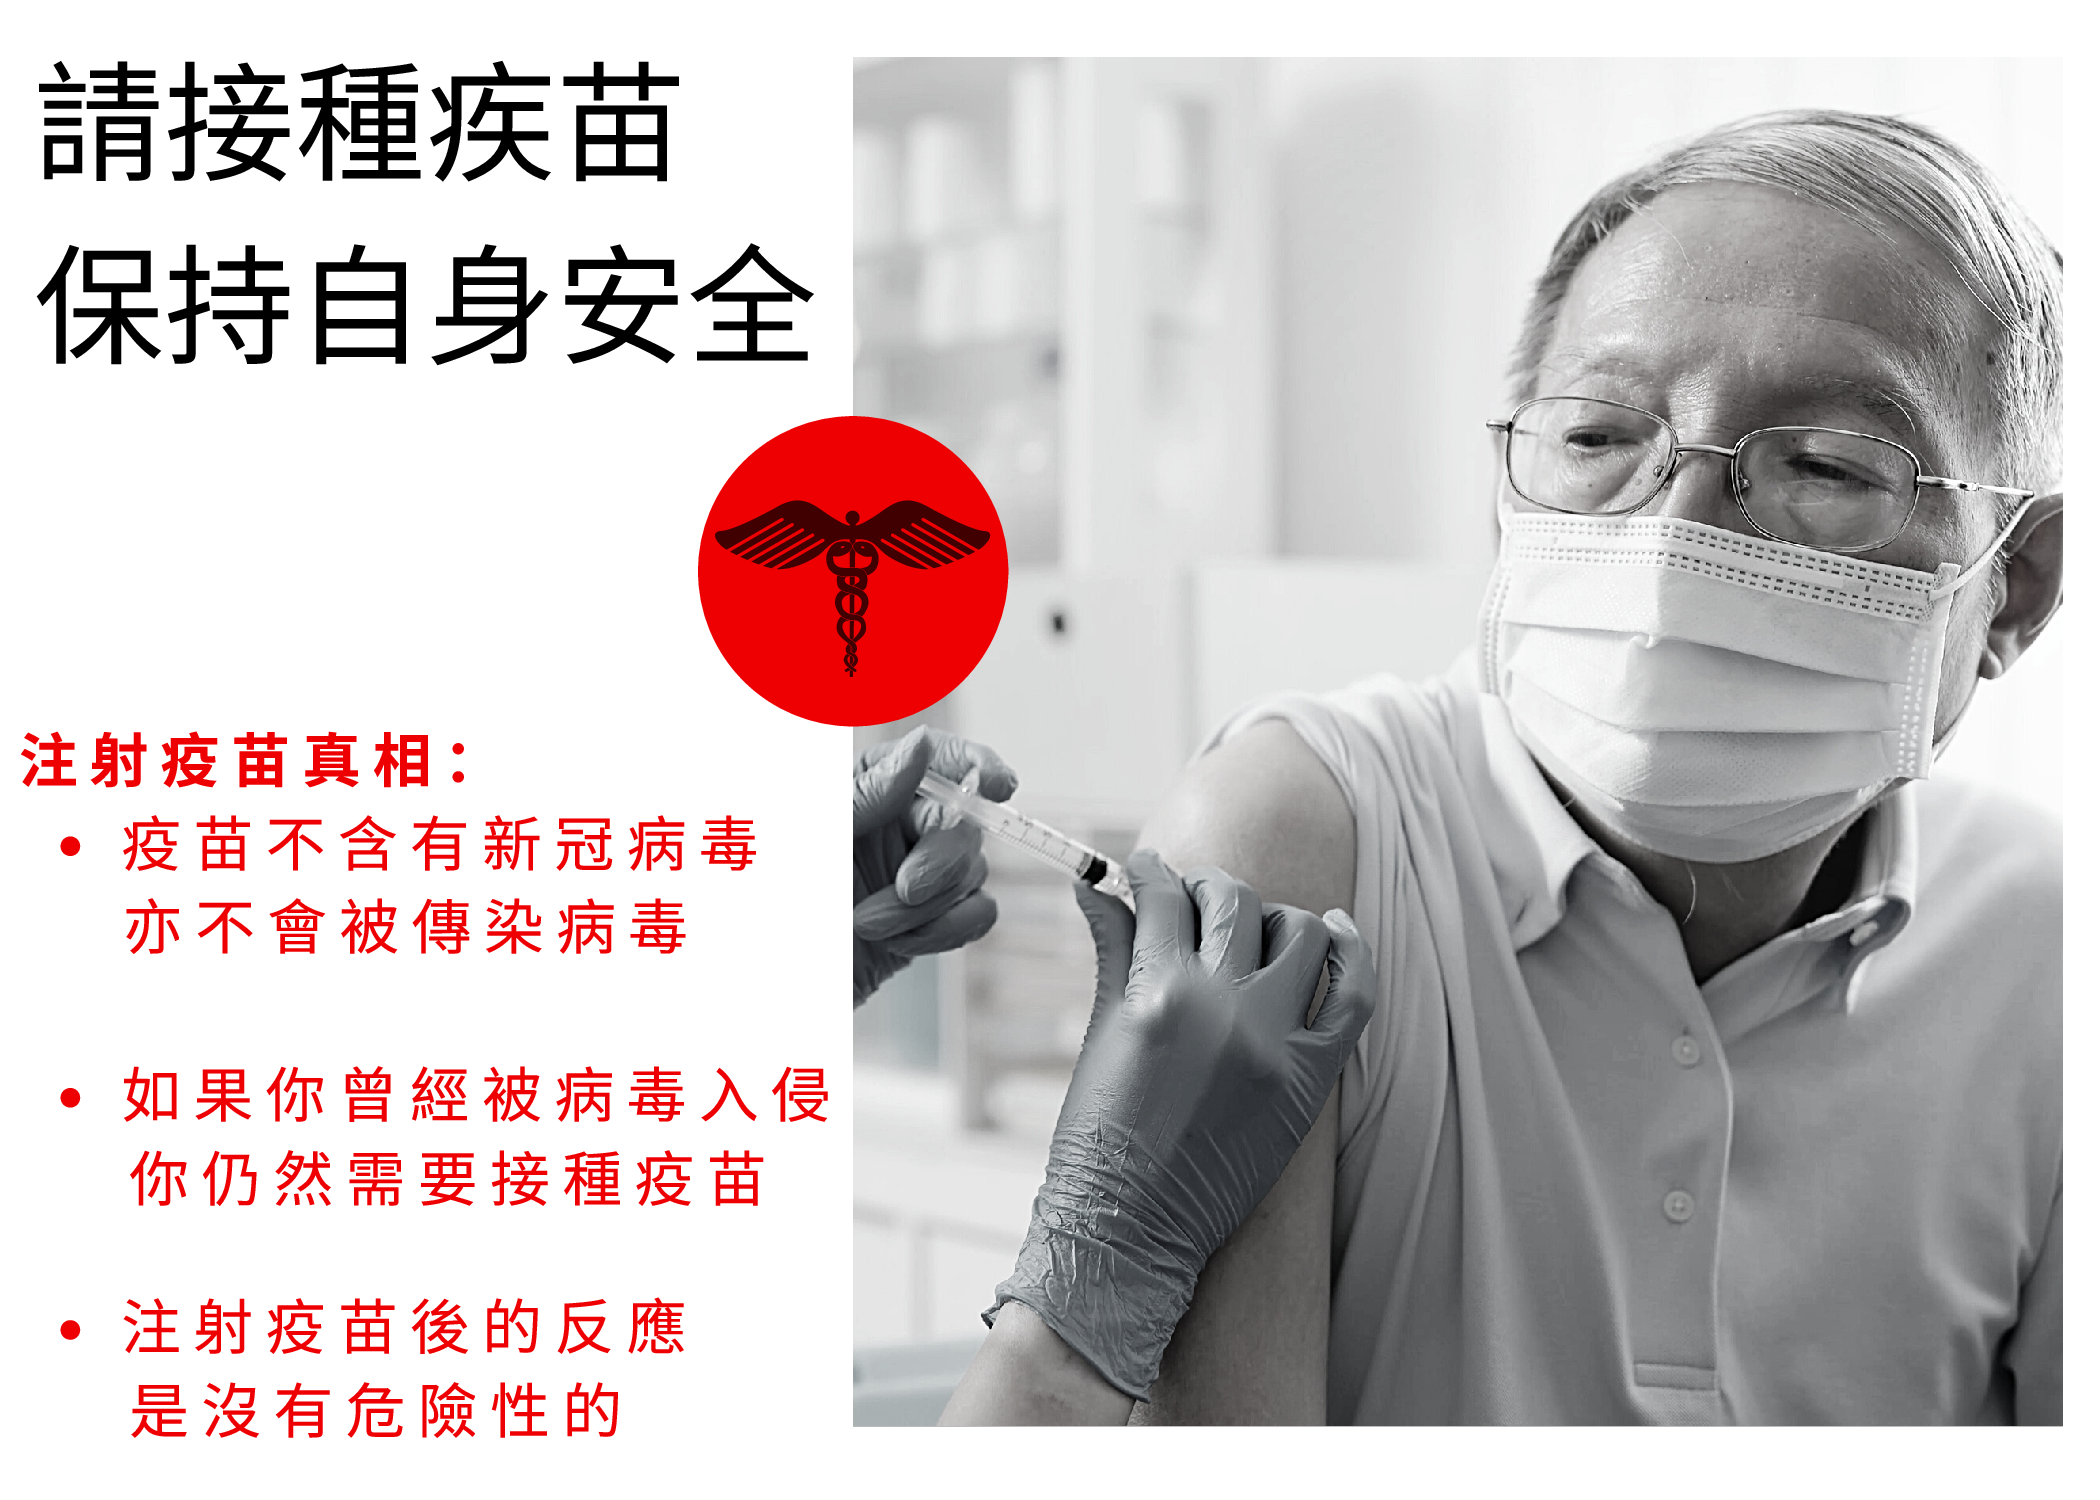 Black and white photograph of an older Asian man wearing glasses and a mask, looking to his shoulder as he receives a vaccine. The wording to the left in black and red font says, "Keep yourself safe, get vaccinated. COVID-19 vaccine facts: The vaccine does not contain the virus and will not give you COVID-19. Even if you've already had COVID-19 you still need the vaccine. The side effects of the COVID-19 vaccine are not dangerous."